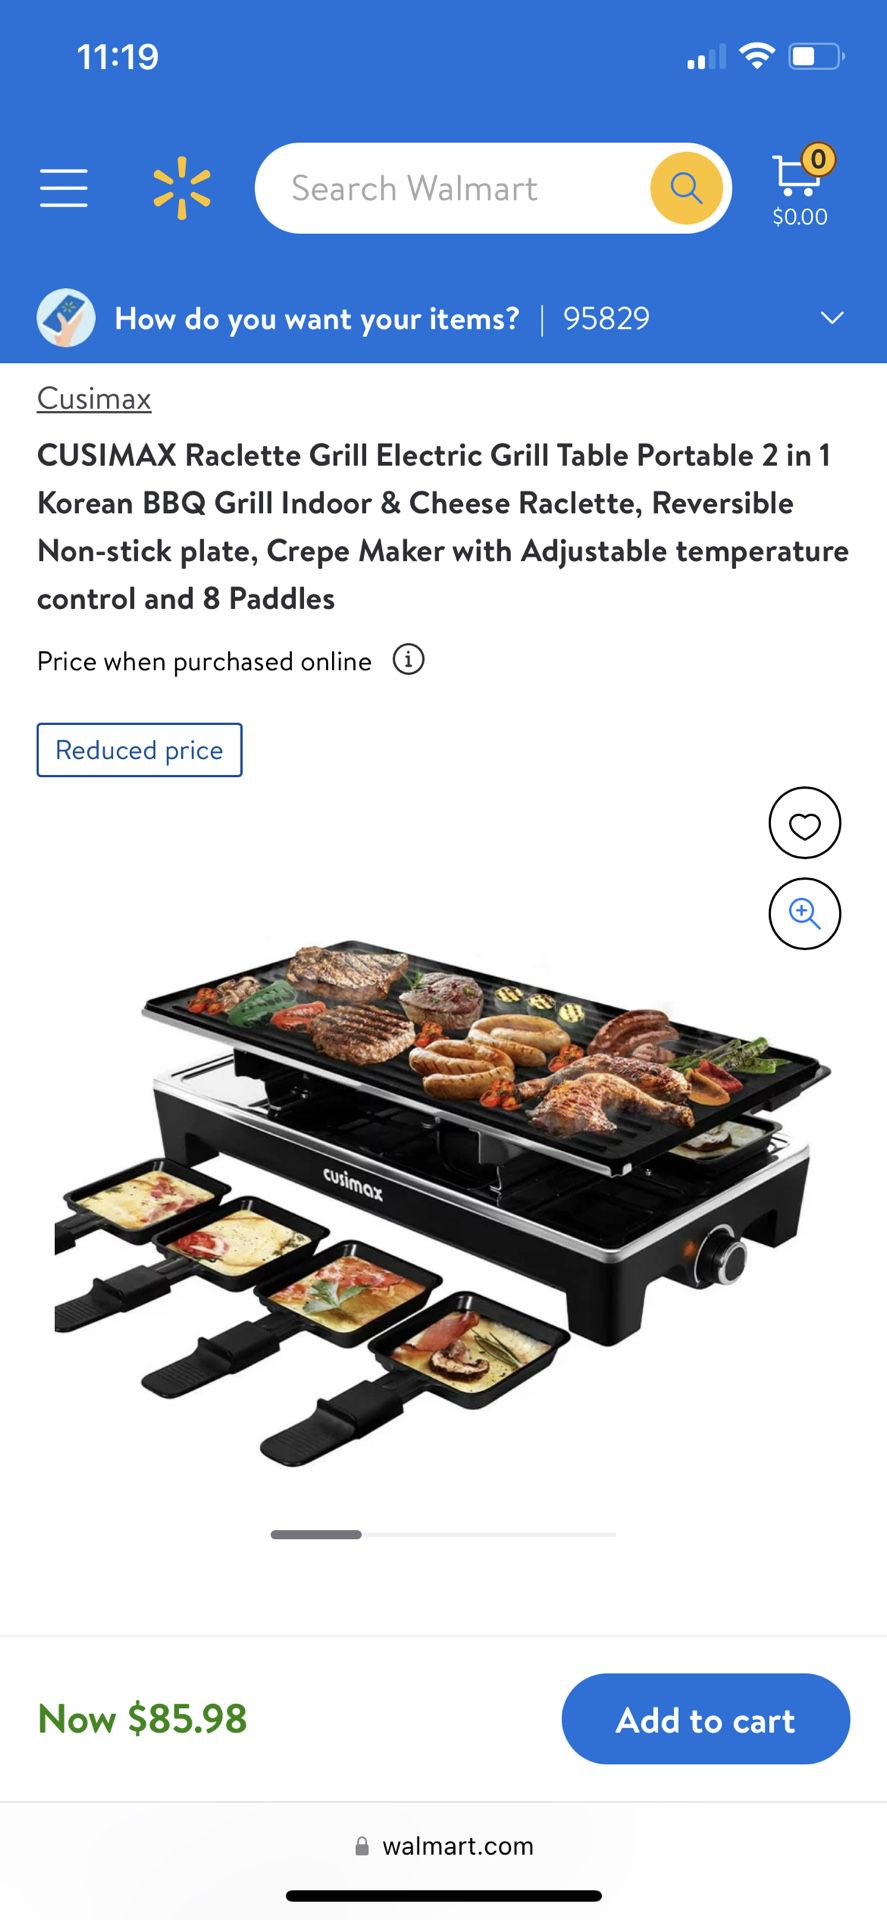  CUSIMAX Raclette Grill Electric Grill Table Portable 2 in 1  Korean BBQ Grill Indoor & Cheese Raclette, Reversible Non-stick plate,  Crepe Maker with Adjustable temperature control and 8 Paddles : Home